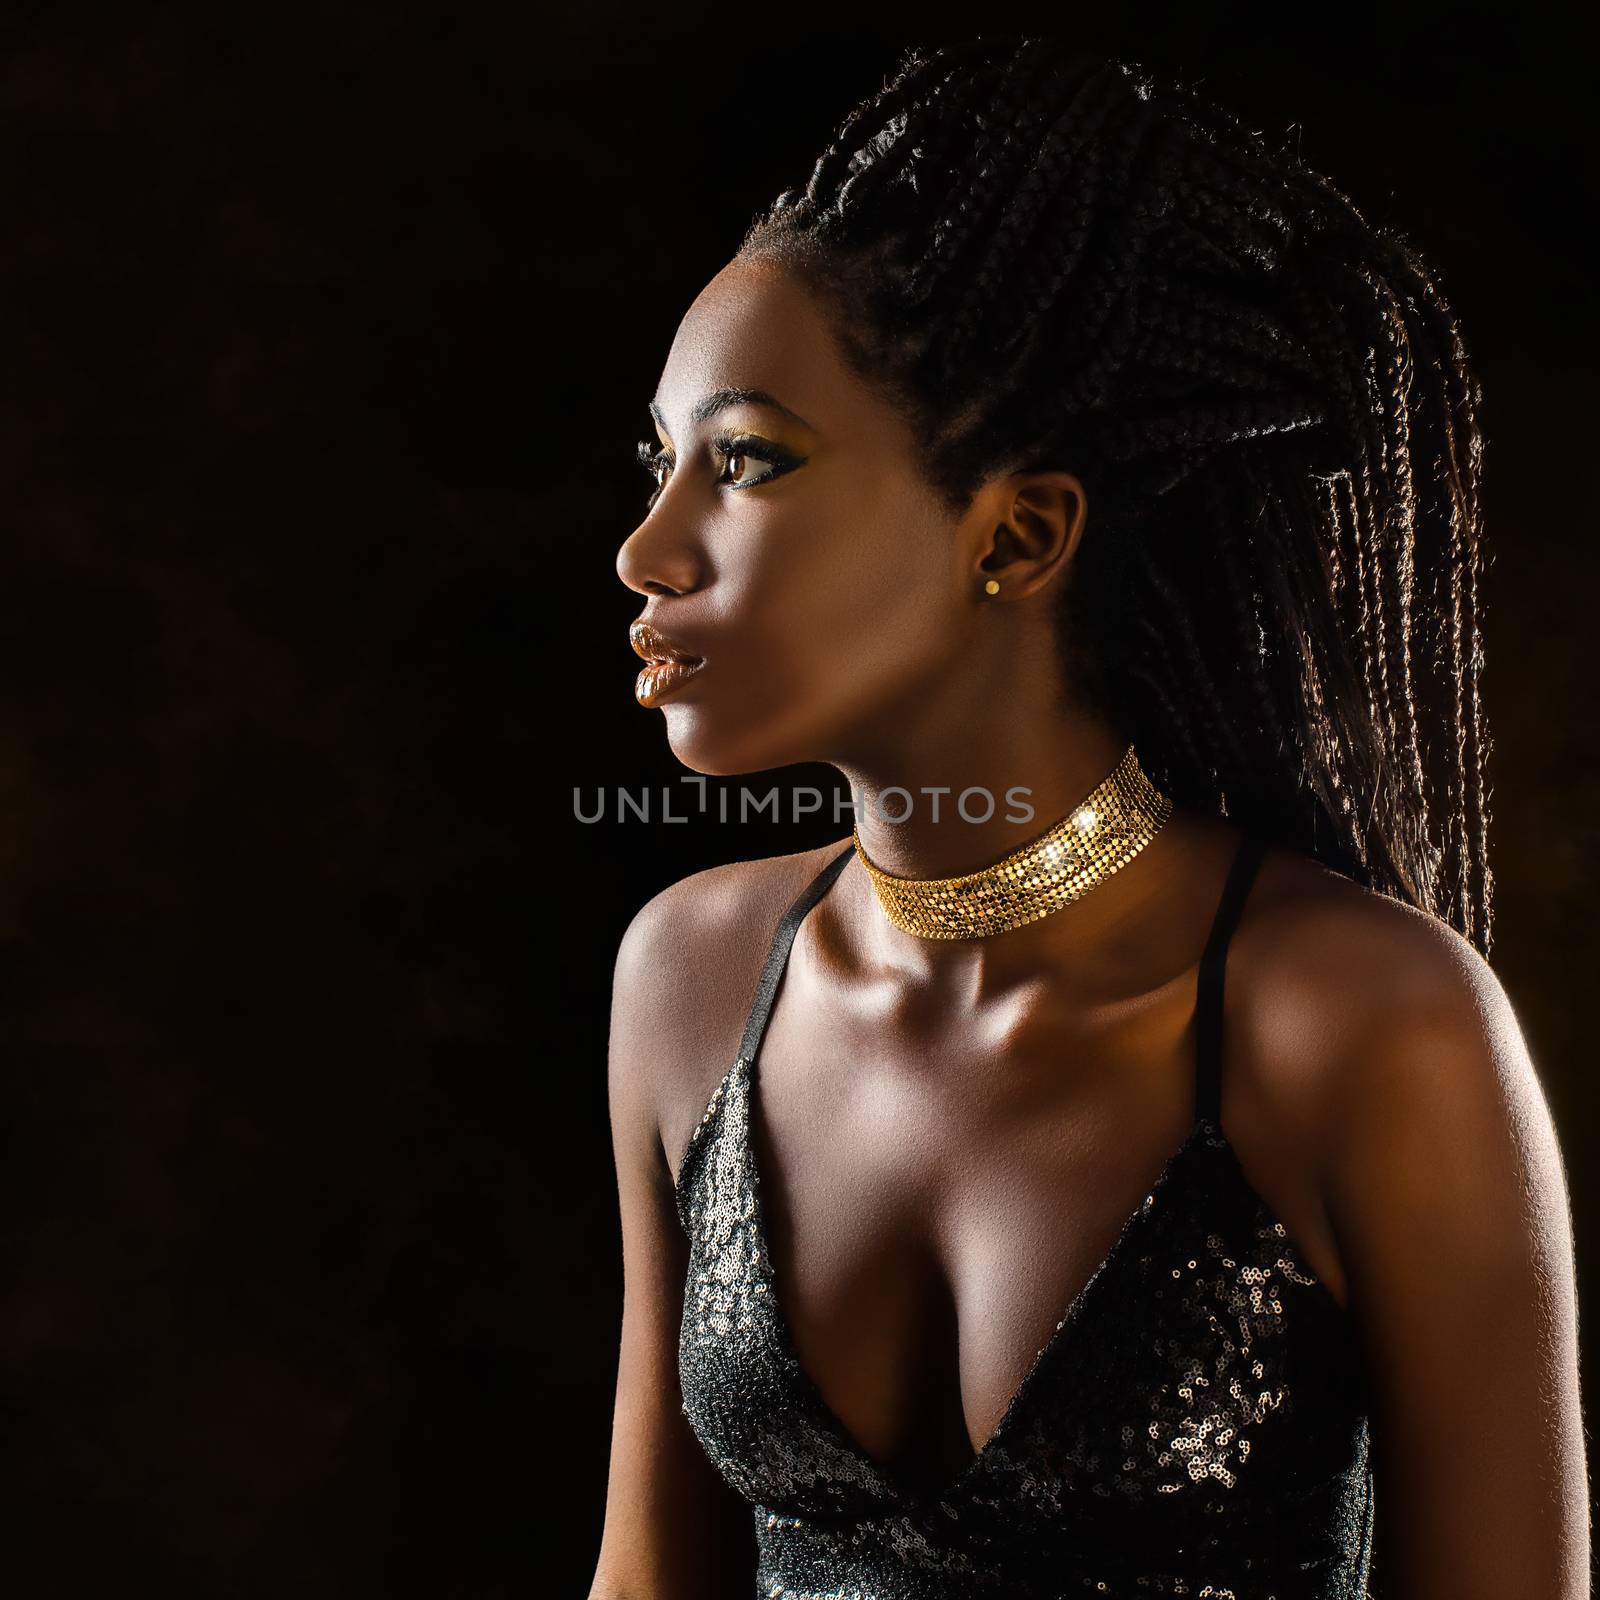 Close up portrait of elegant young african woman in party dress. Low key close up studio shot of girl with long braided hair against dark background.